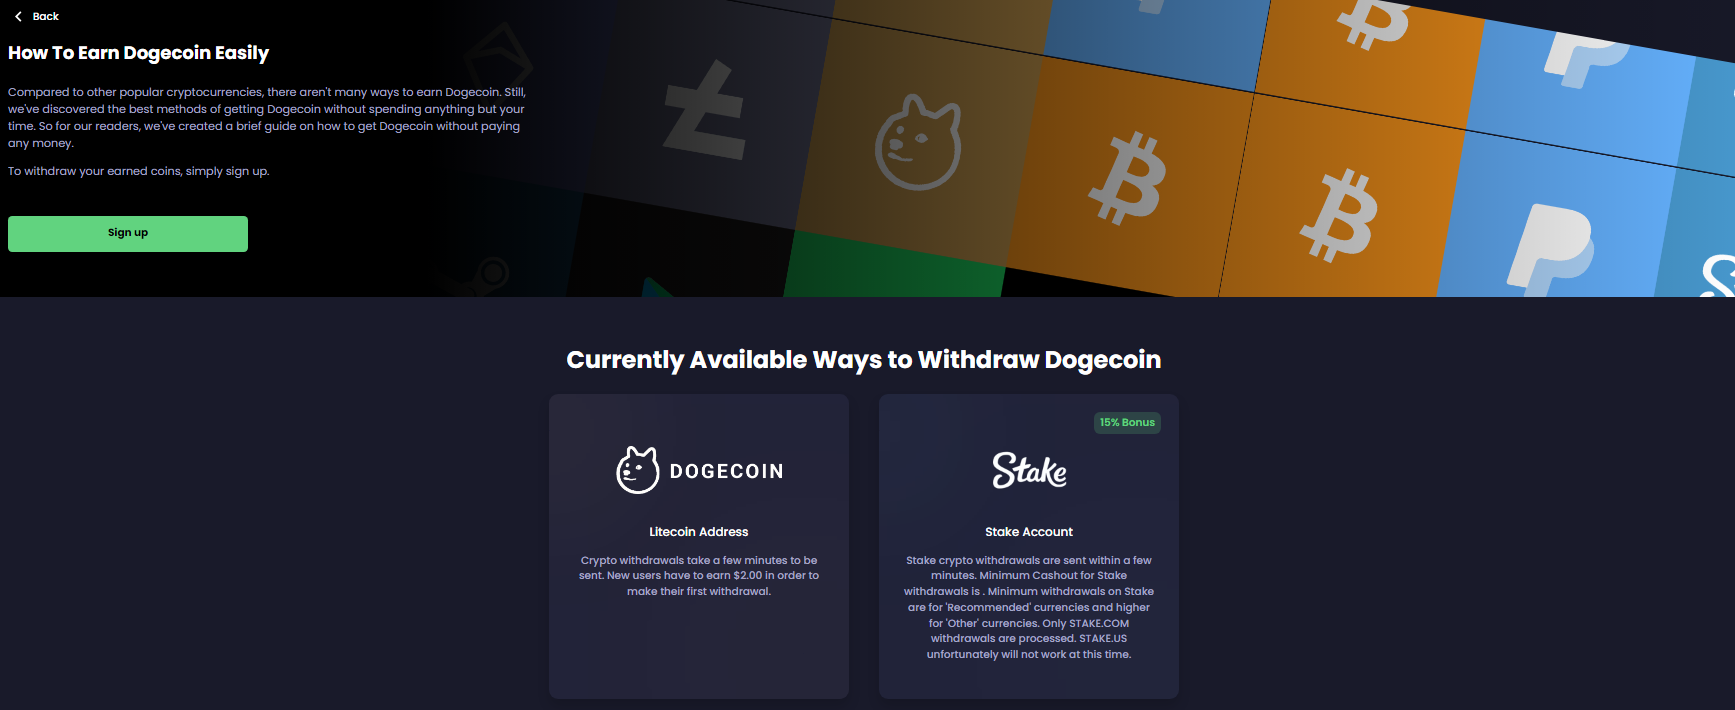 Dogecoin is offered on Freecash